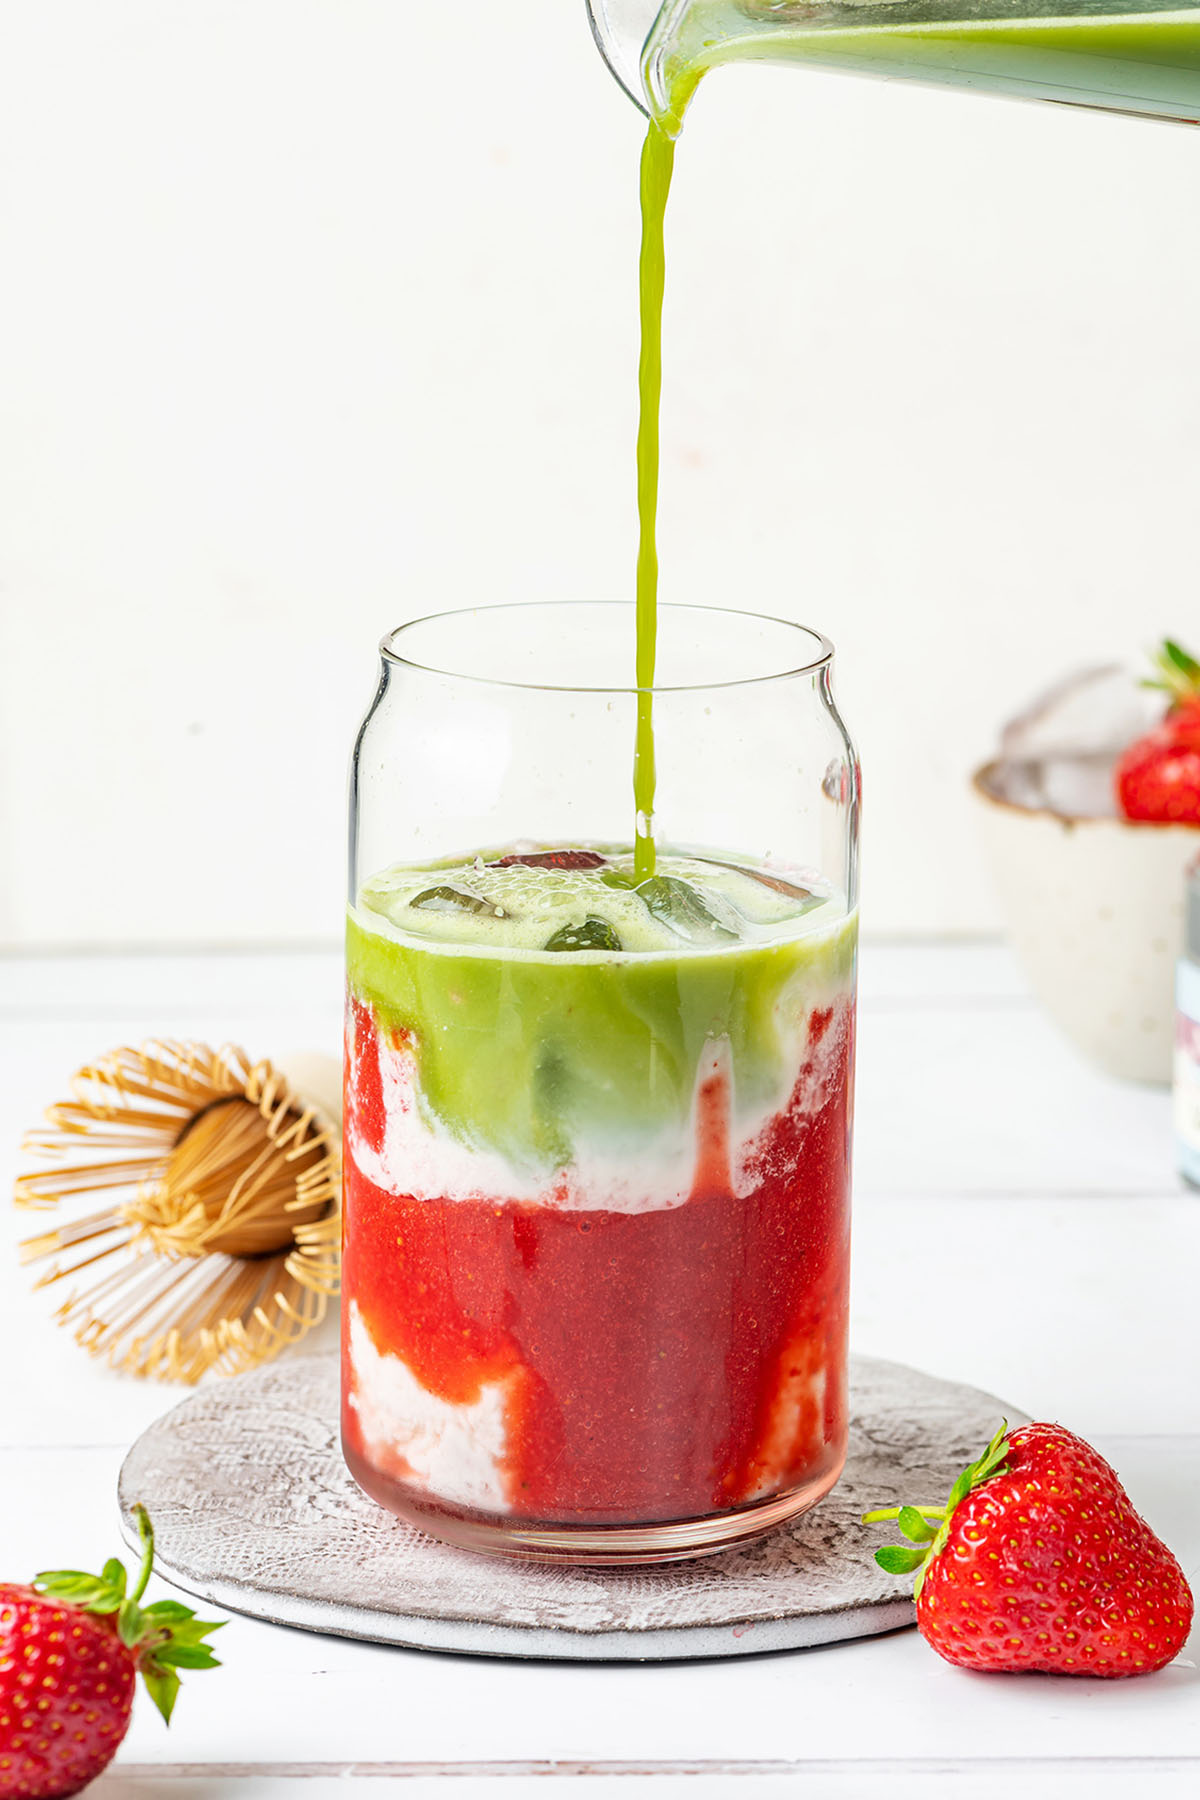 Pouring the matcha into a glass with strawberry puree and milk